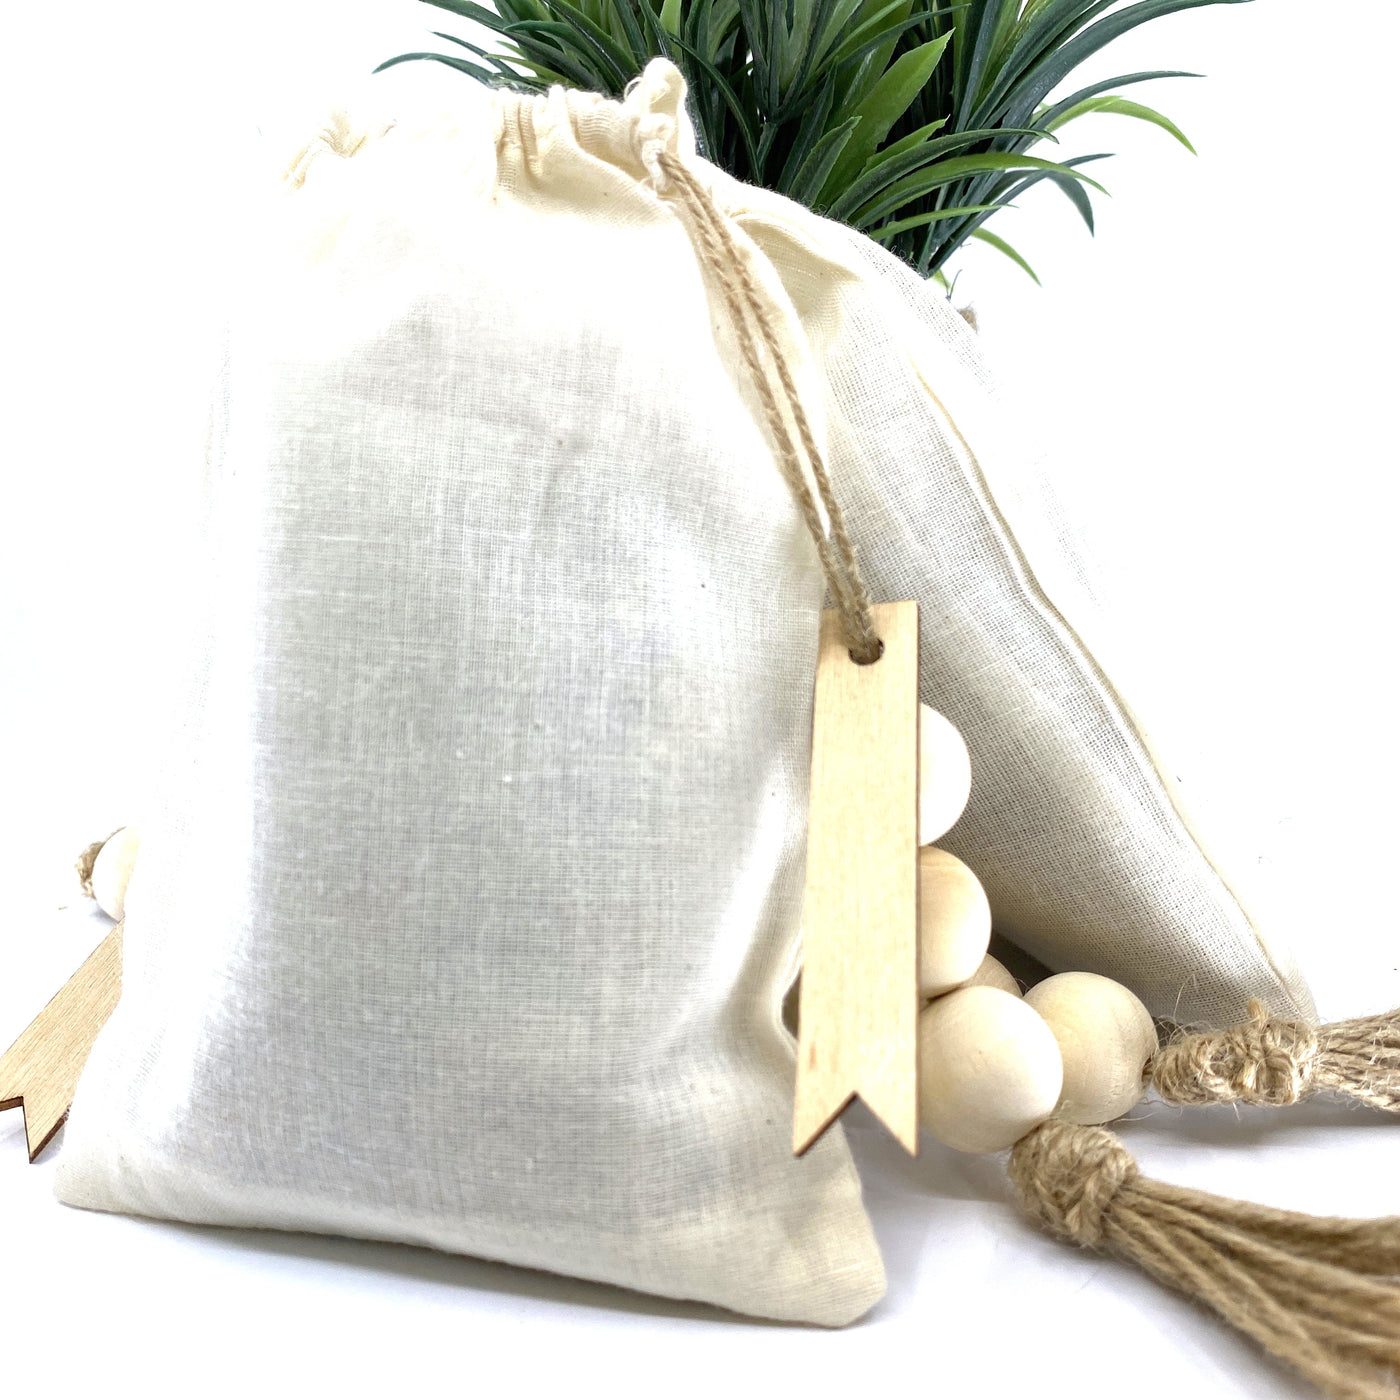 100% Naturally Dried Lavender Flowers, Jute & Wooden Beaded Drawstring Sack, 1/2 Oz